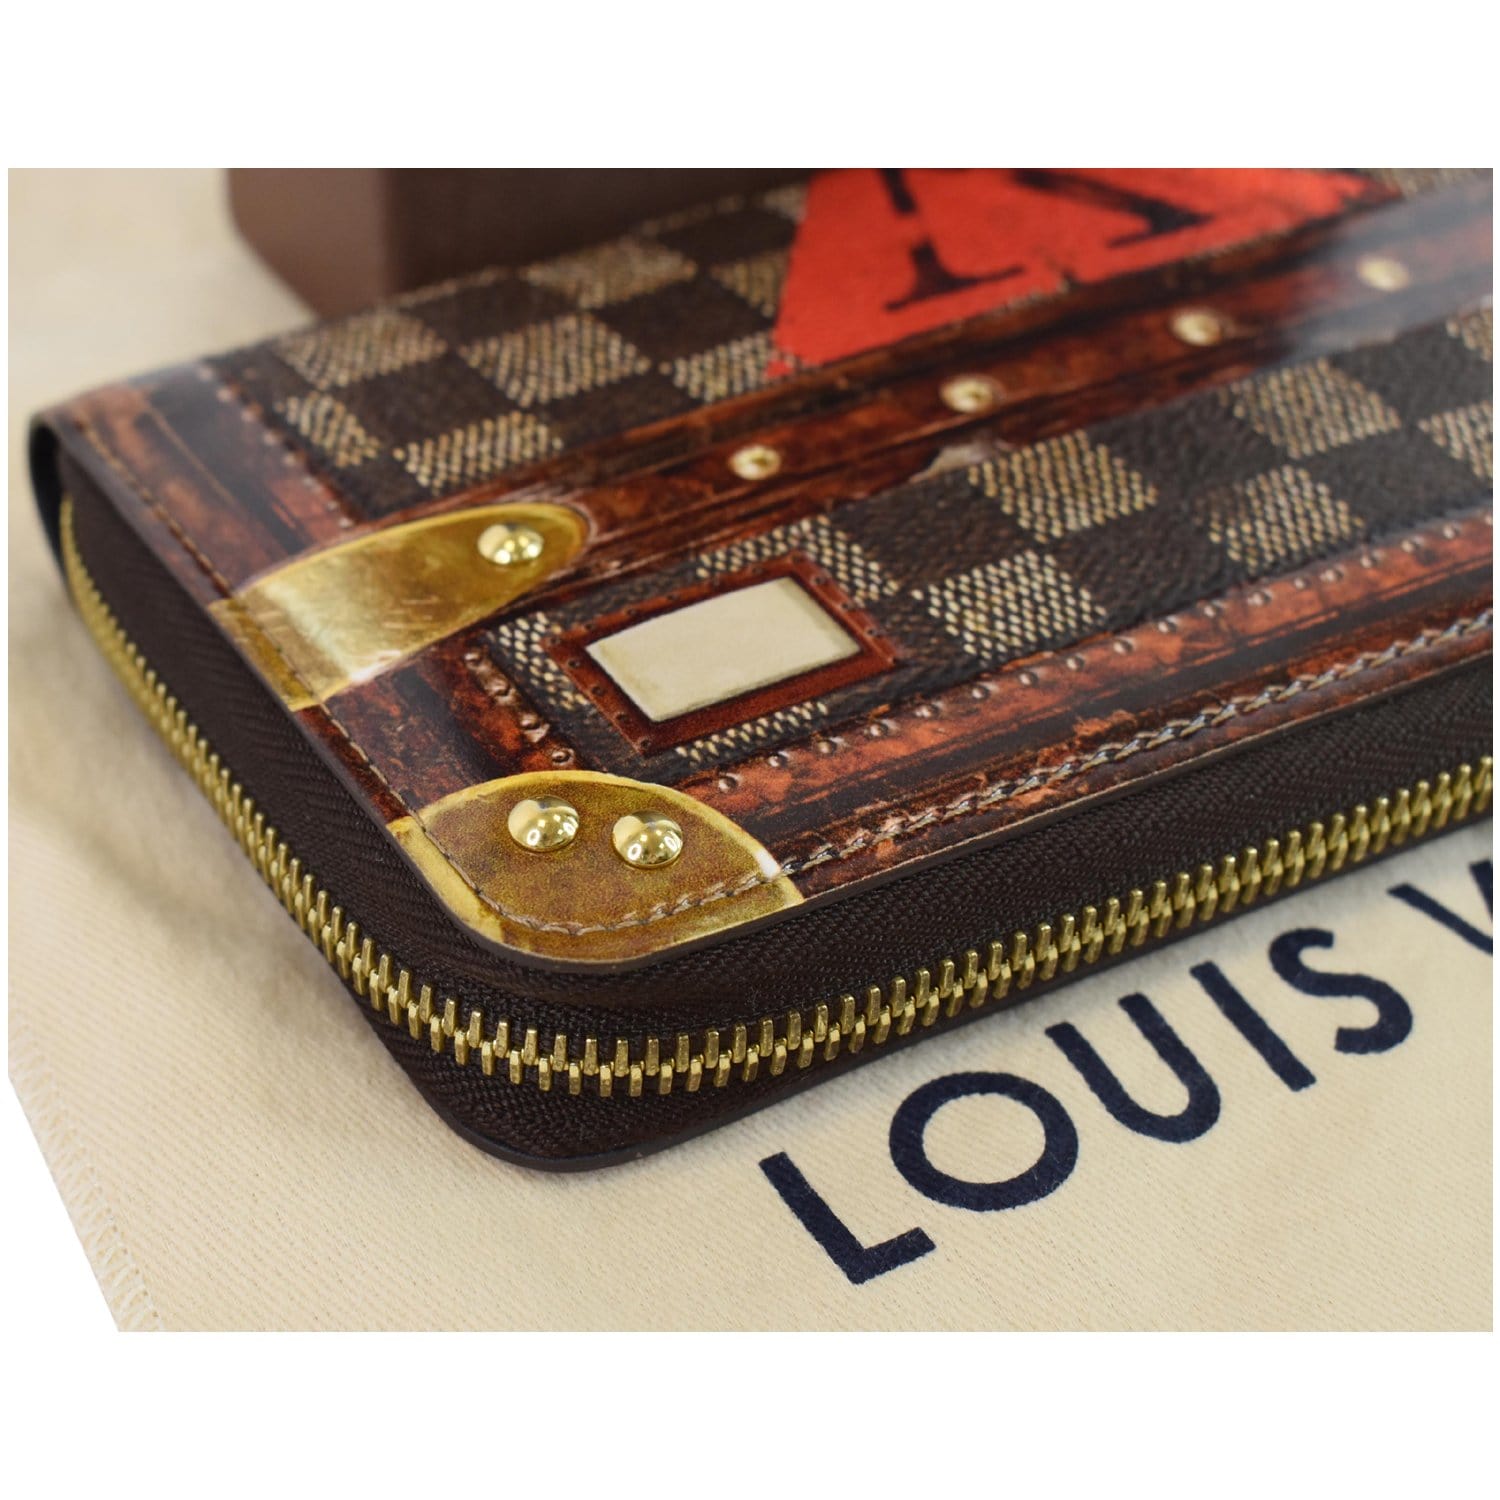 Louis vuitton long wallet black, Like new just the